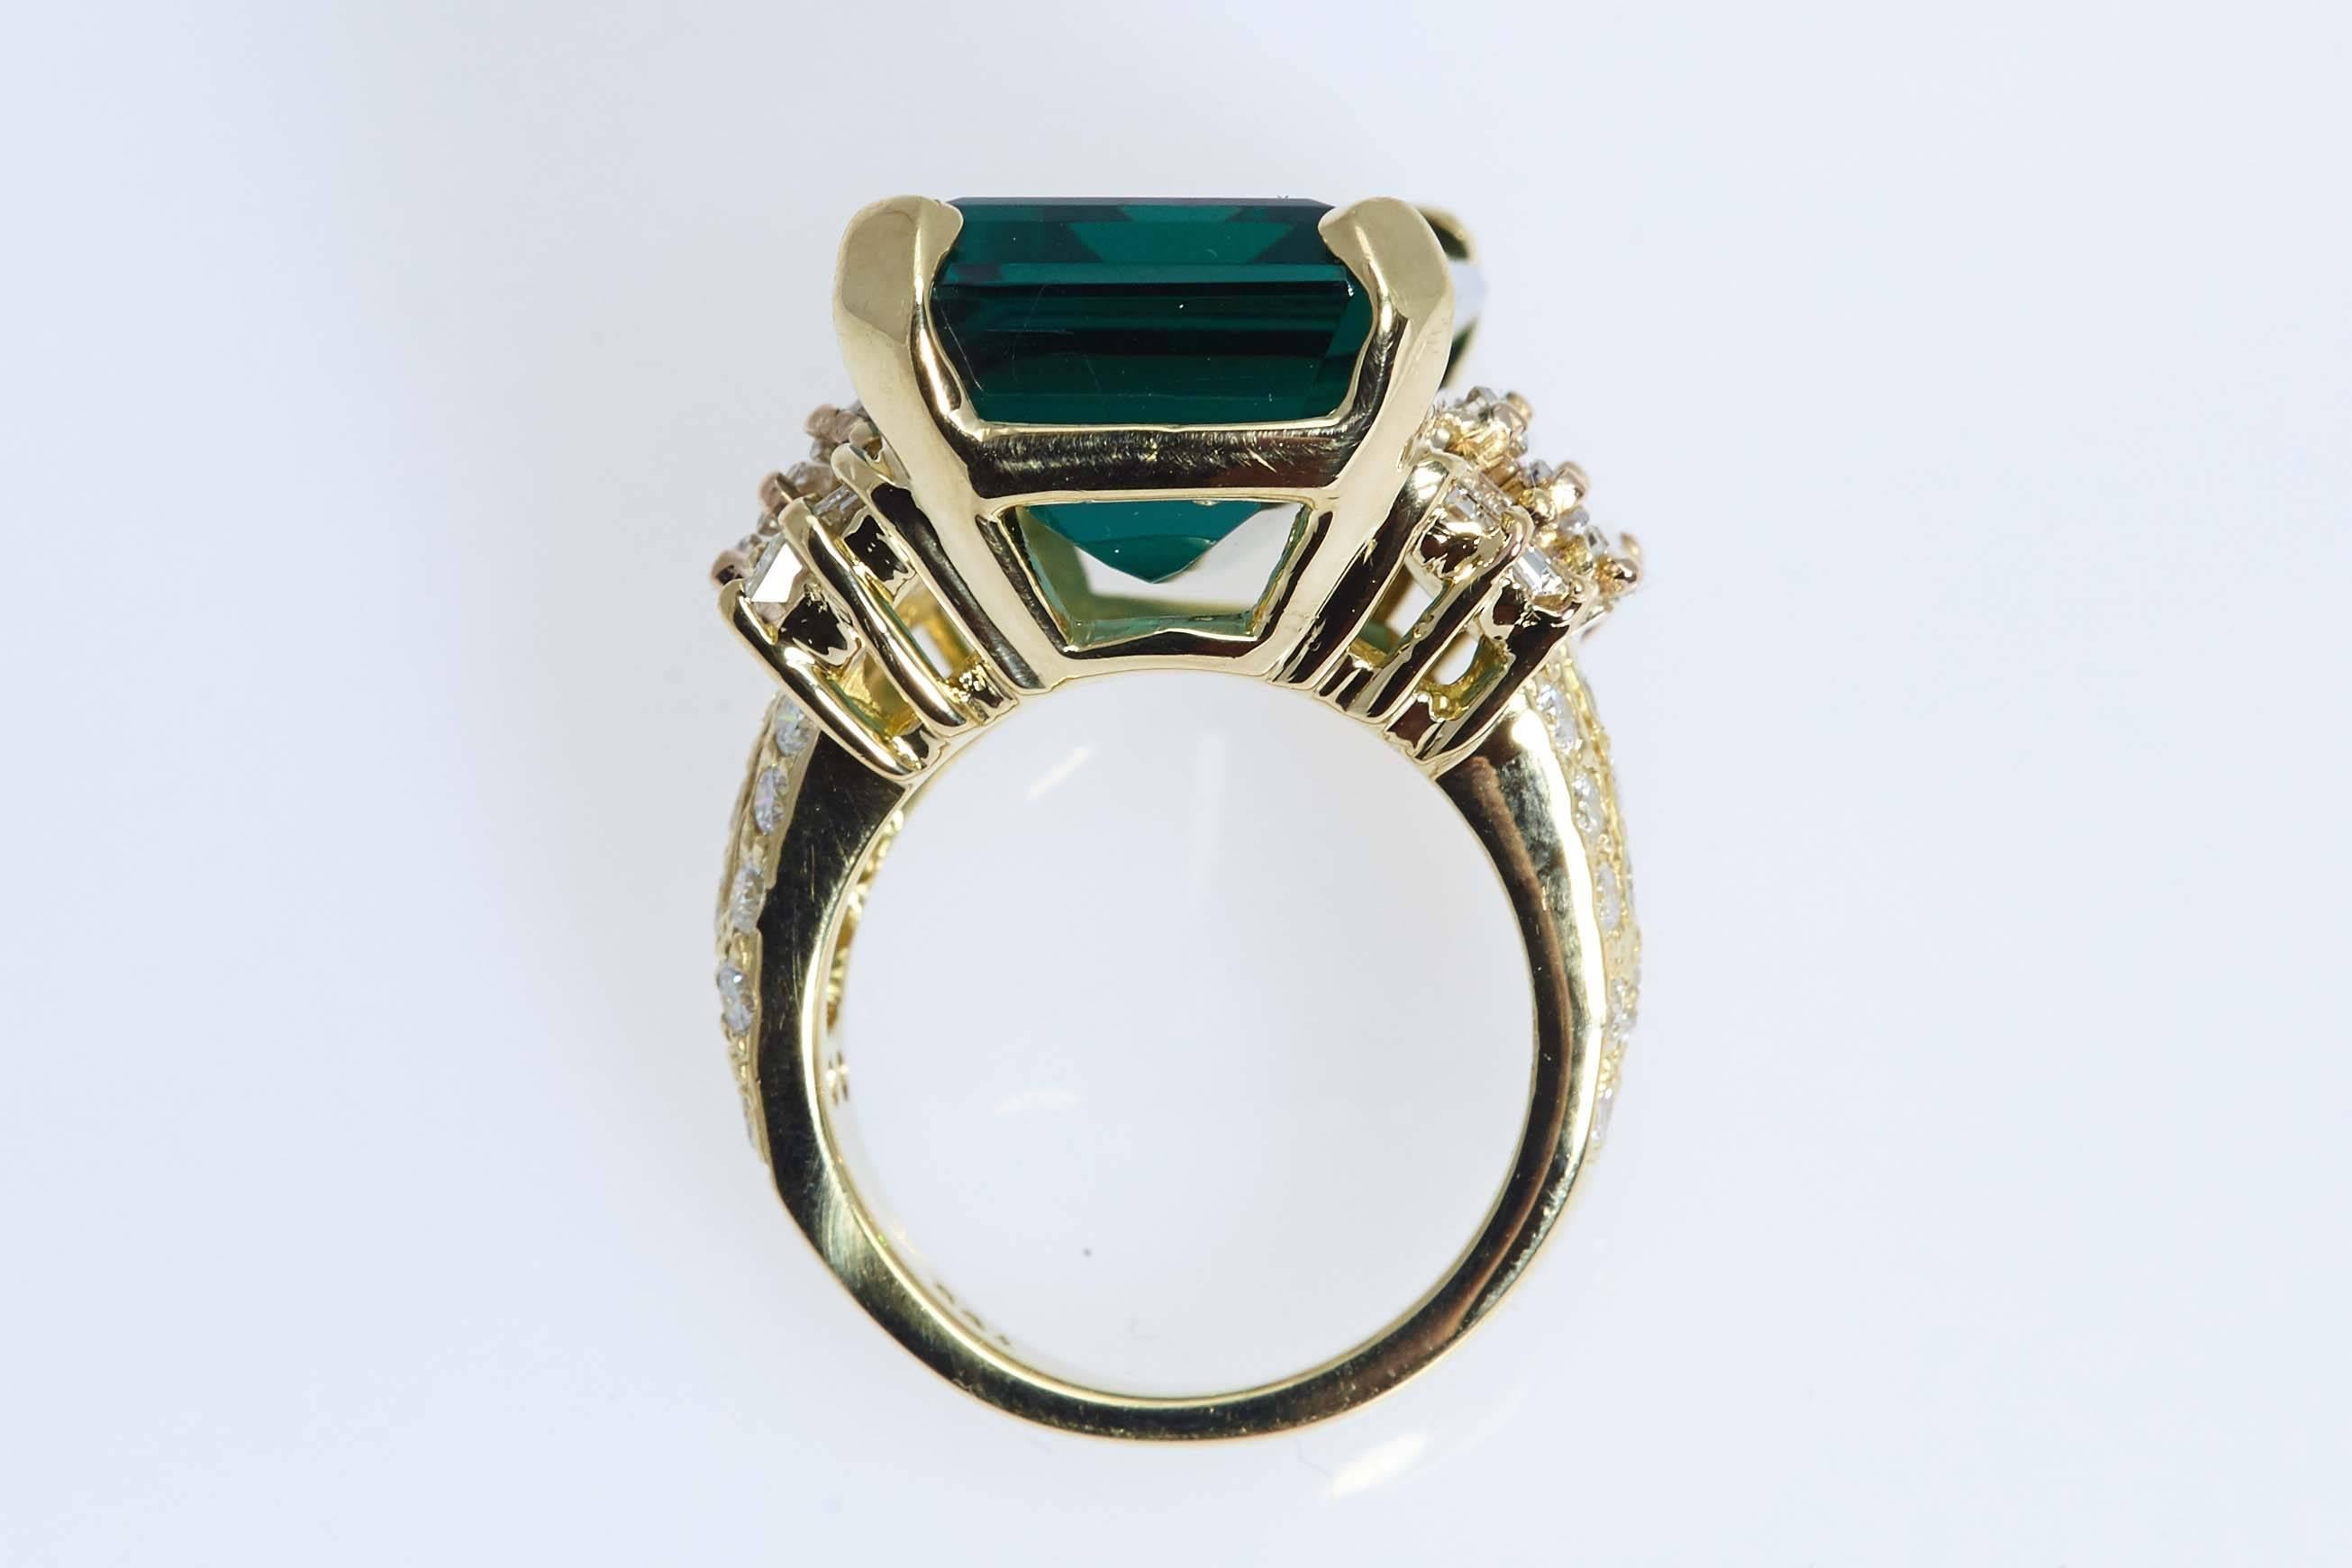 Emerald Cut Tourmaline 22.98 Carat Diamond Gold Ring In New Condition For Sale In New York, NY